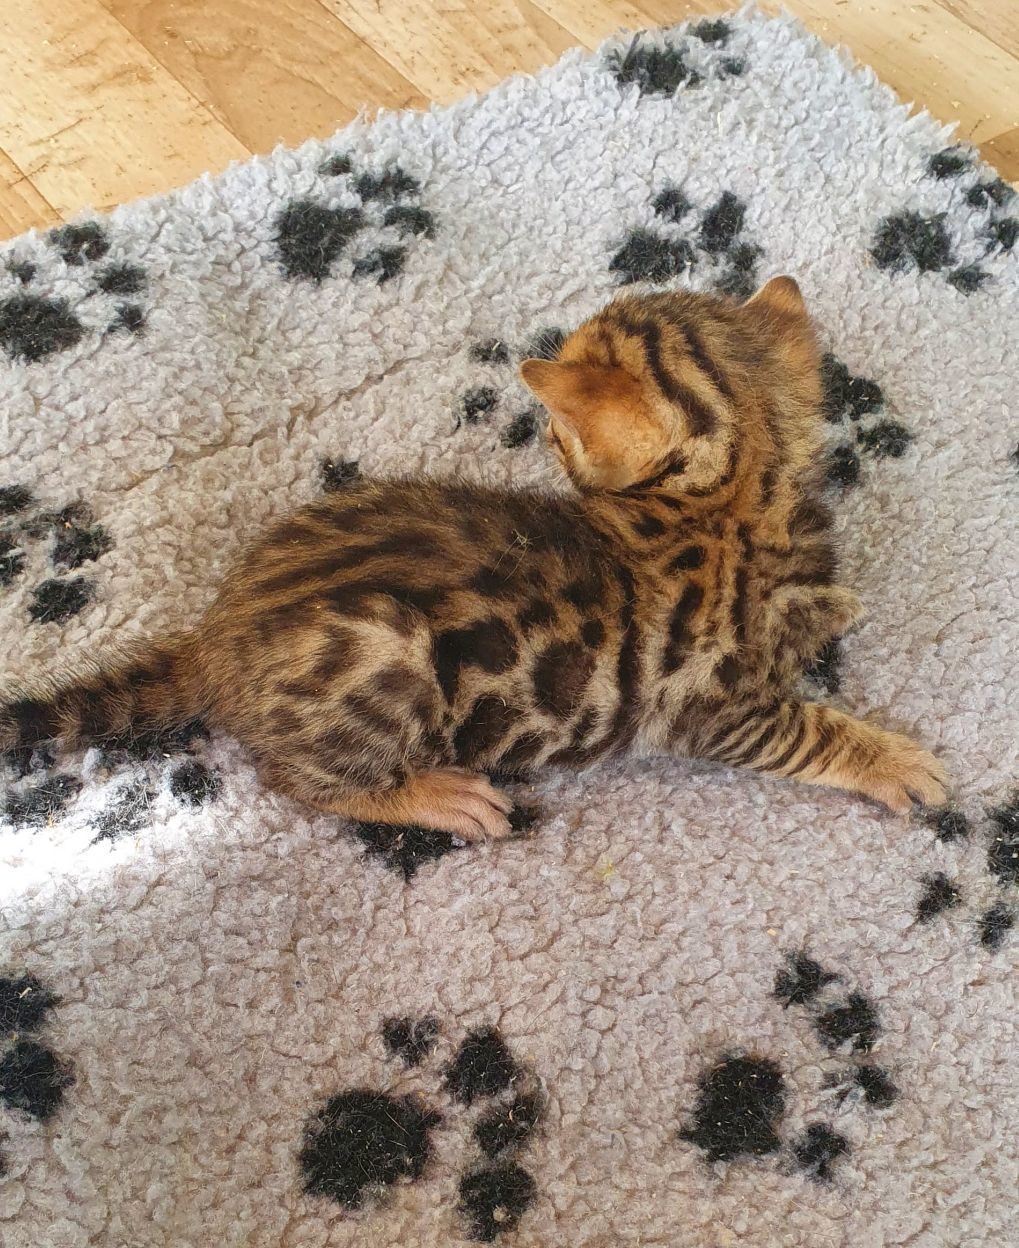 Photo 1 of Ellies Boys-sold the Bengal kitten.